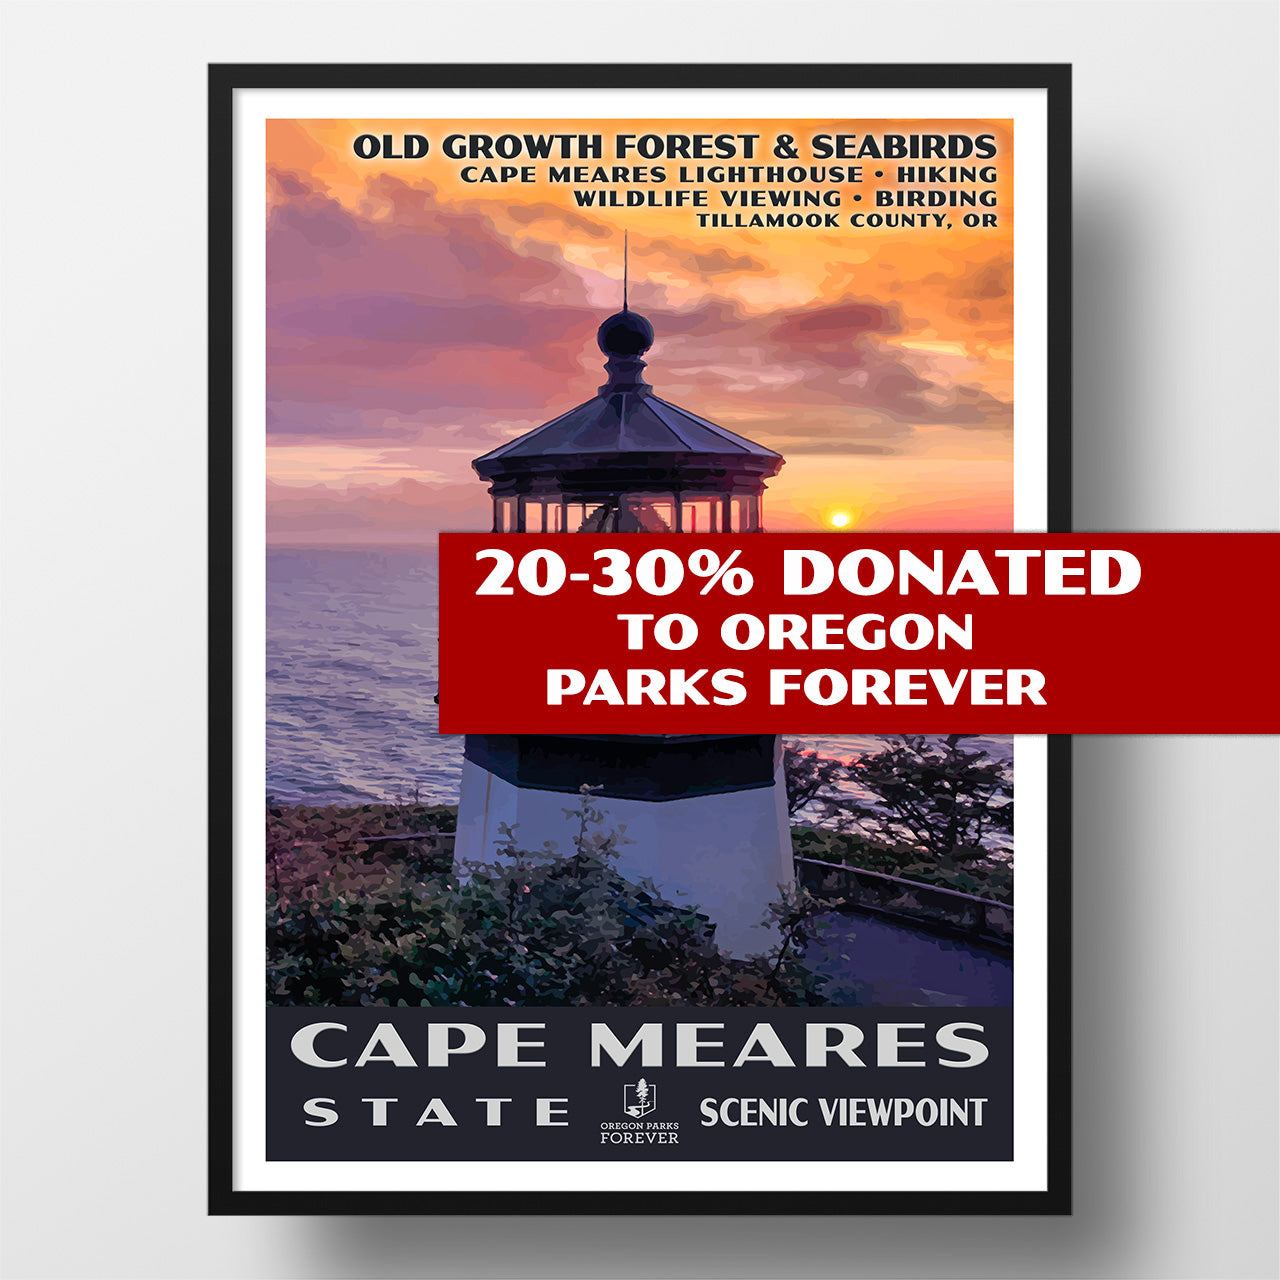 Cape Mears State Scenic Viewpoint poster